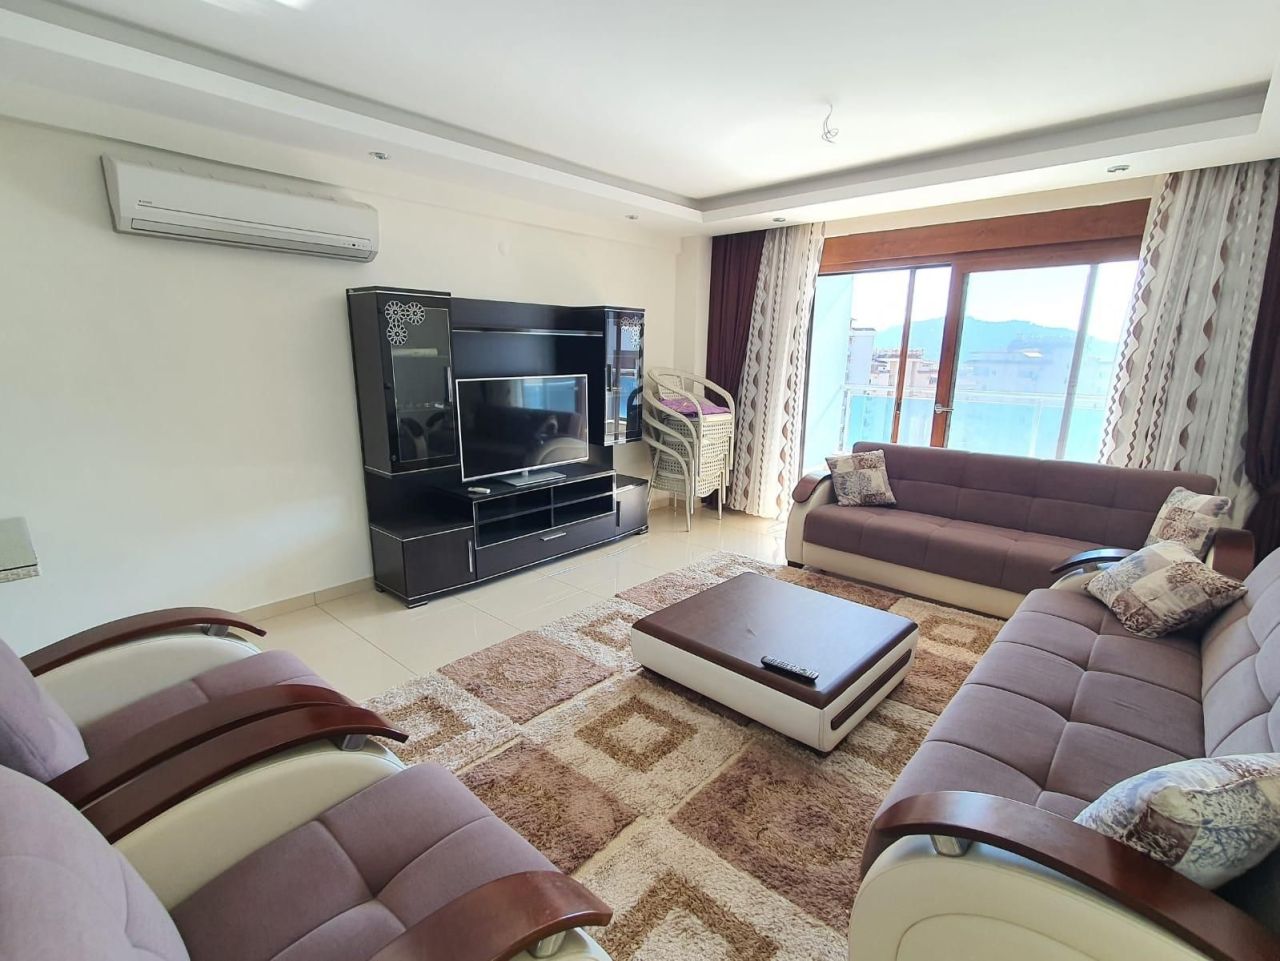 Flat in Alanya, Turkey - picture 1